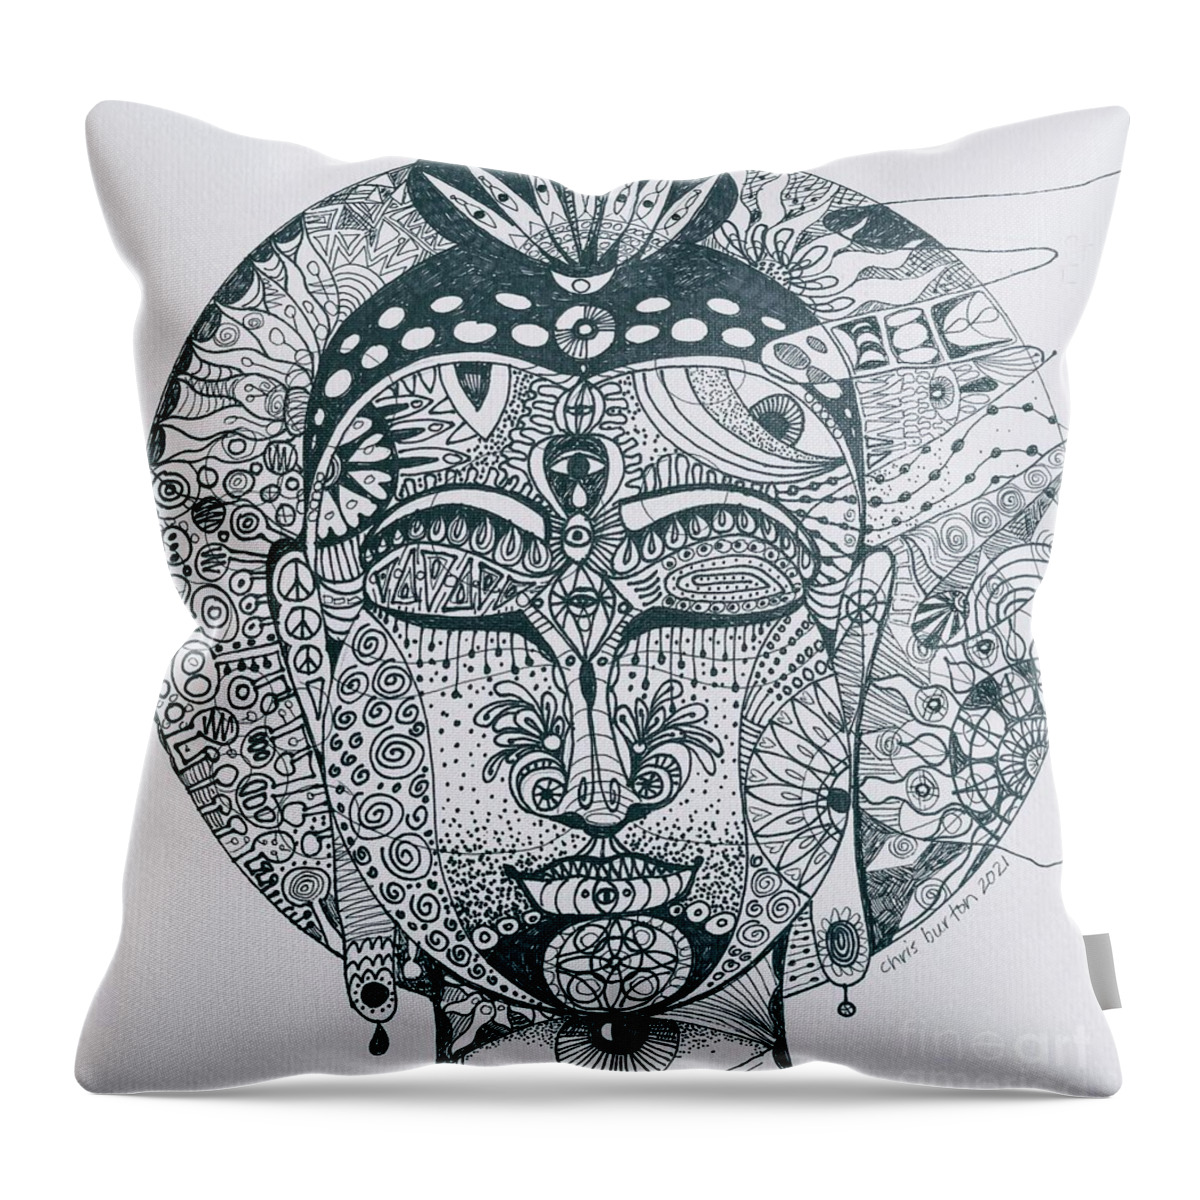 Original Line Art Illustration Throw Pillow featuring the drawing The Journey by Chris Burton